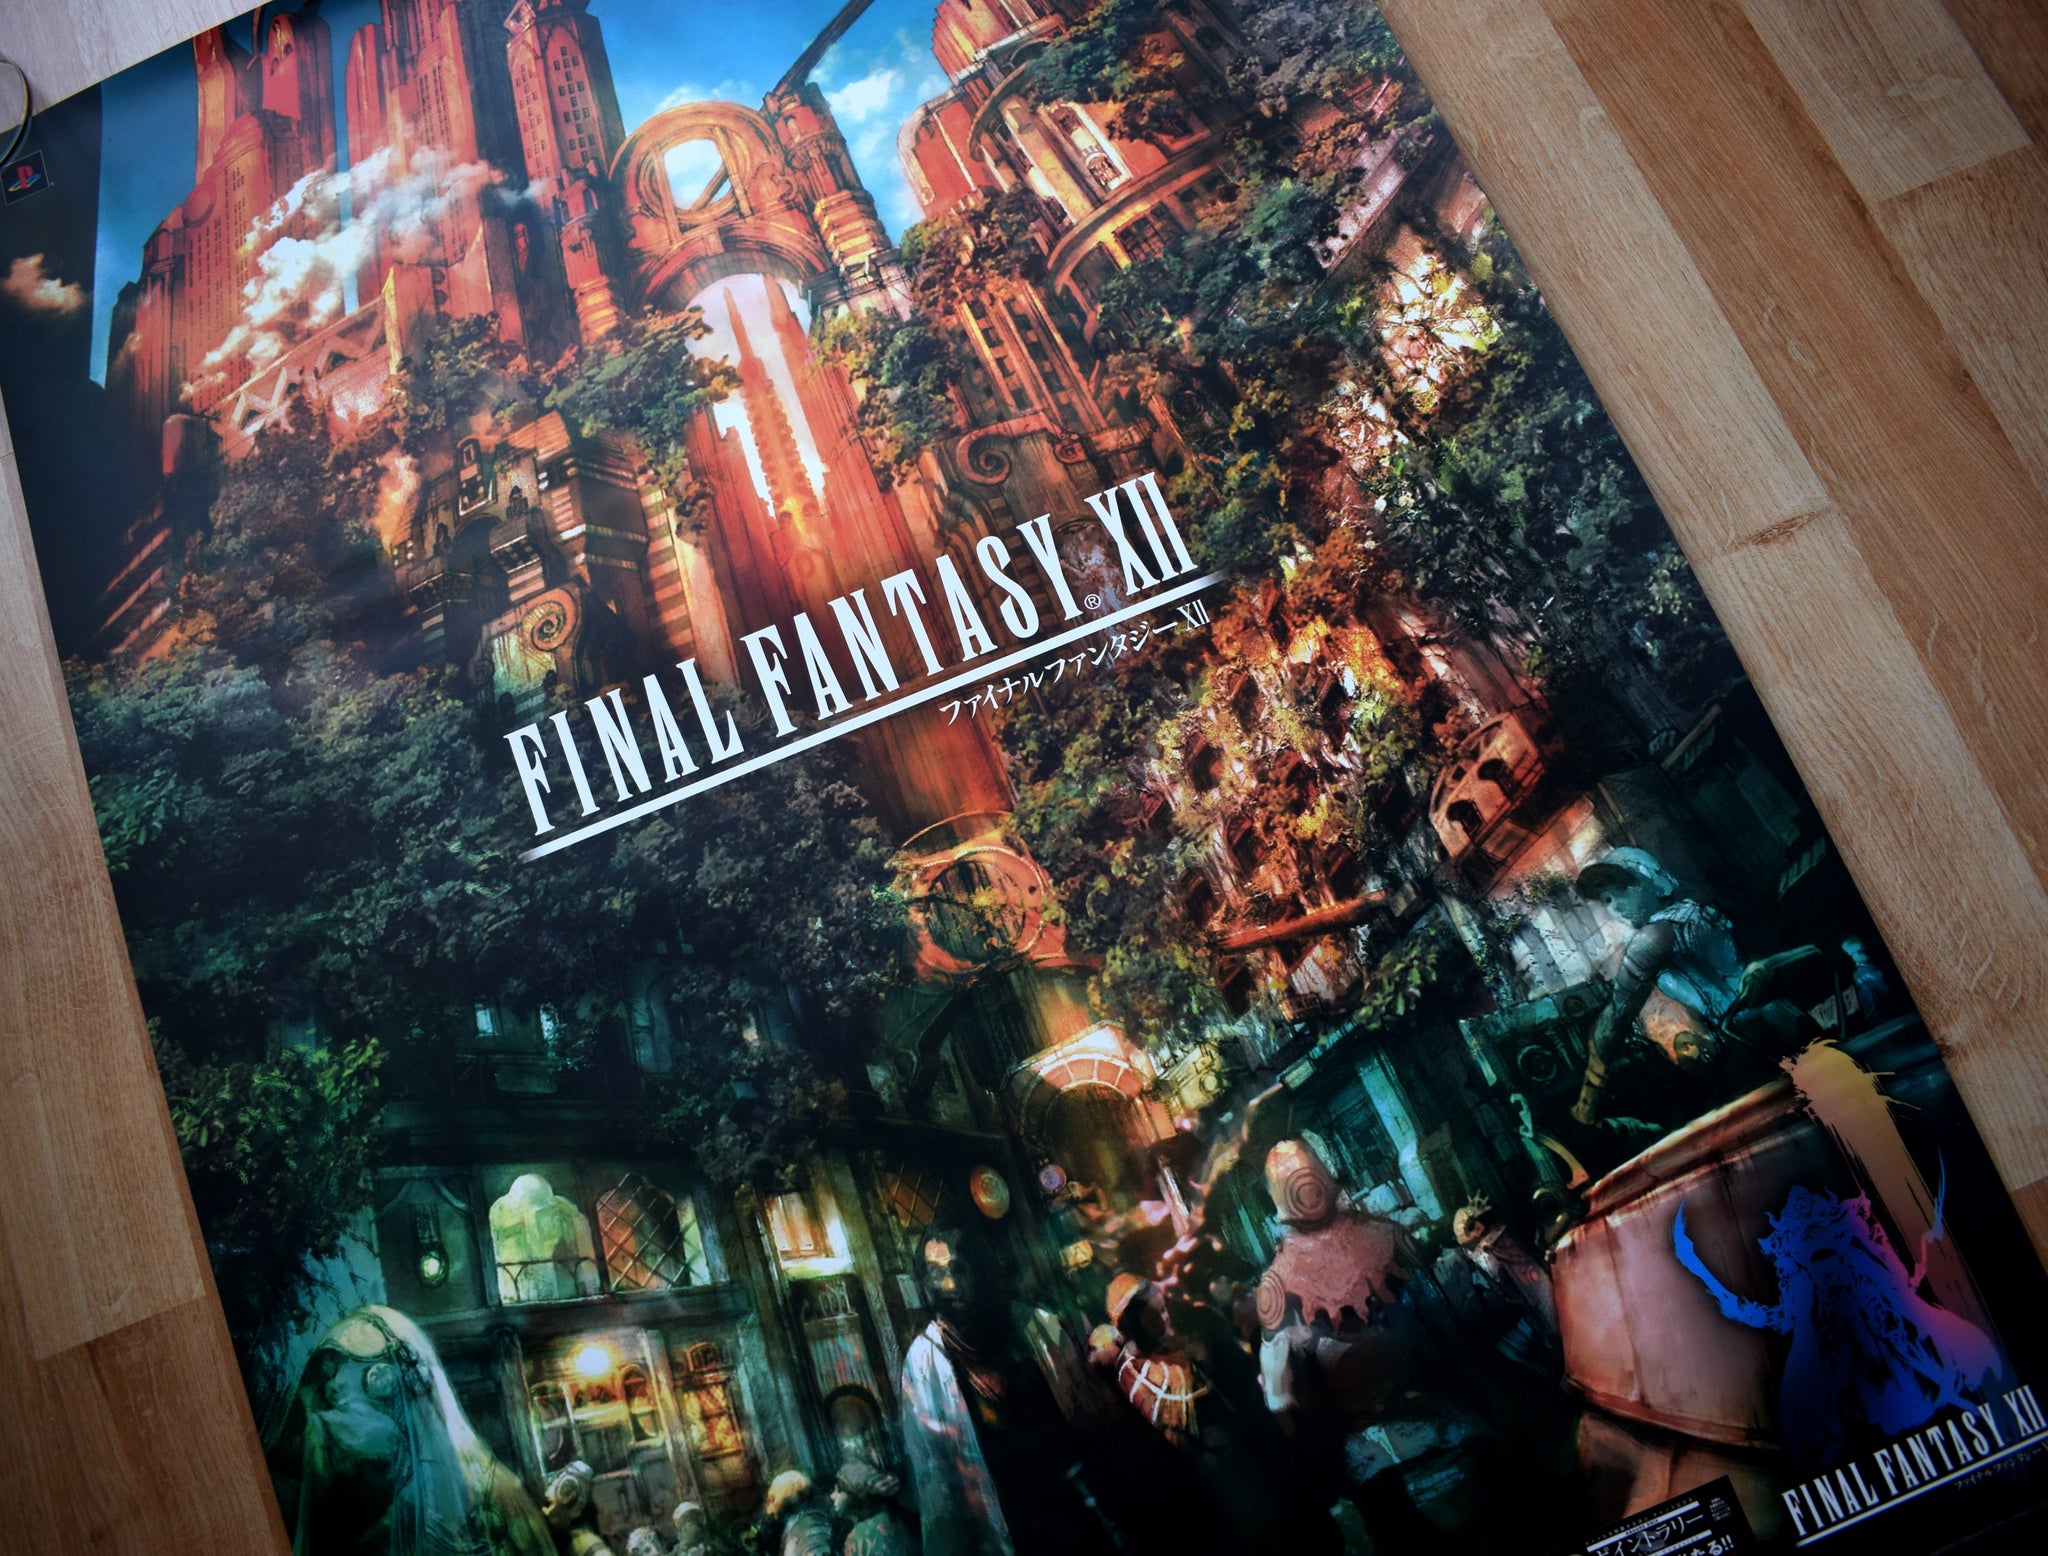 Final Fantasy XII (B2) Japanese Promotional Poster #2 – The Poster Hut